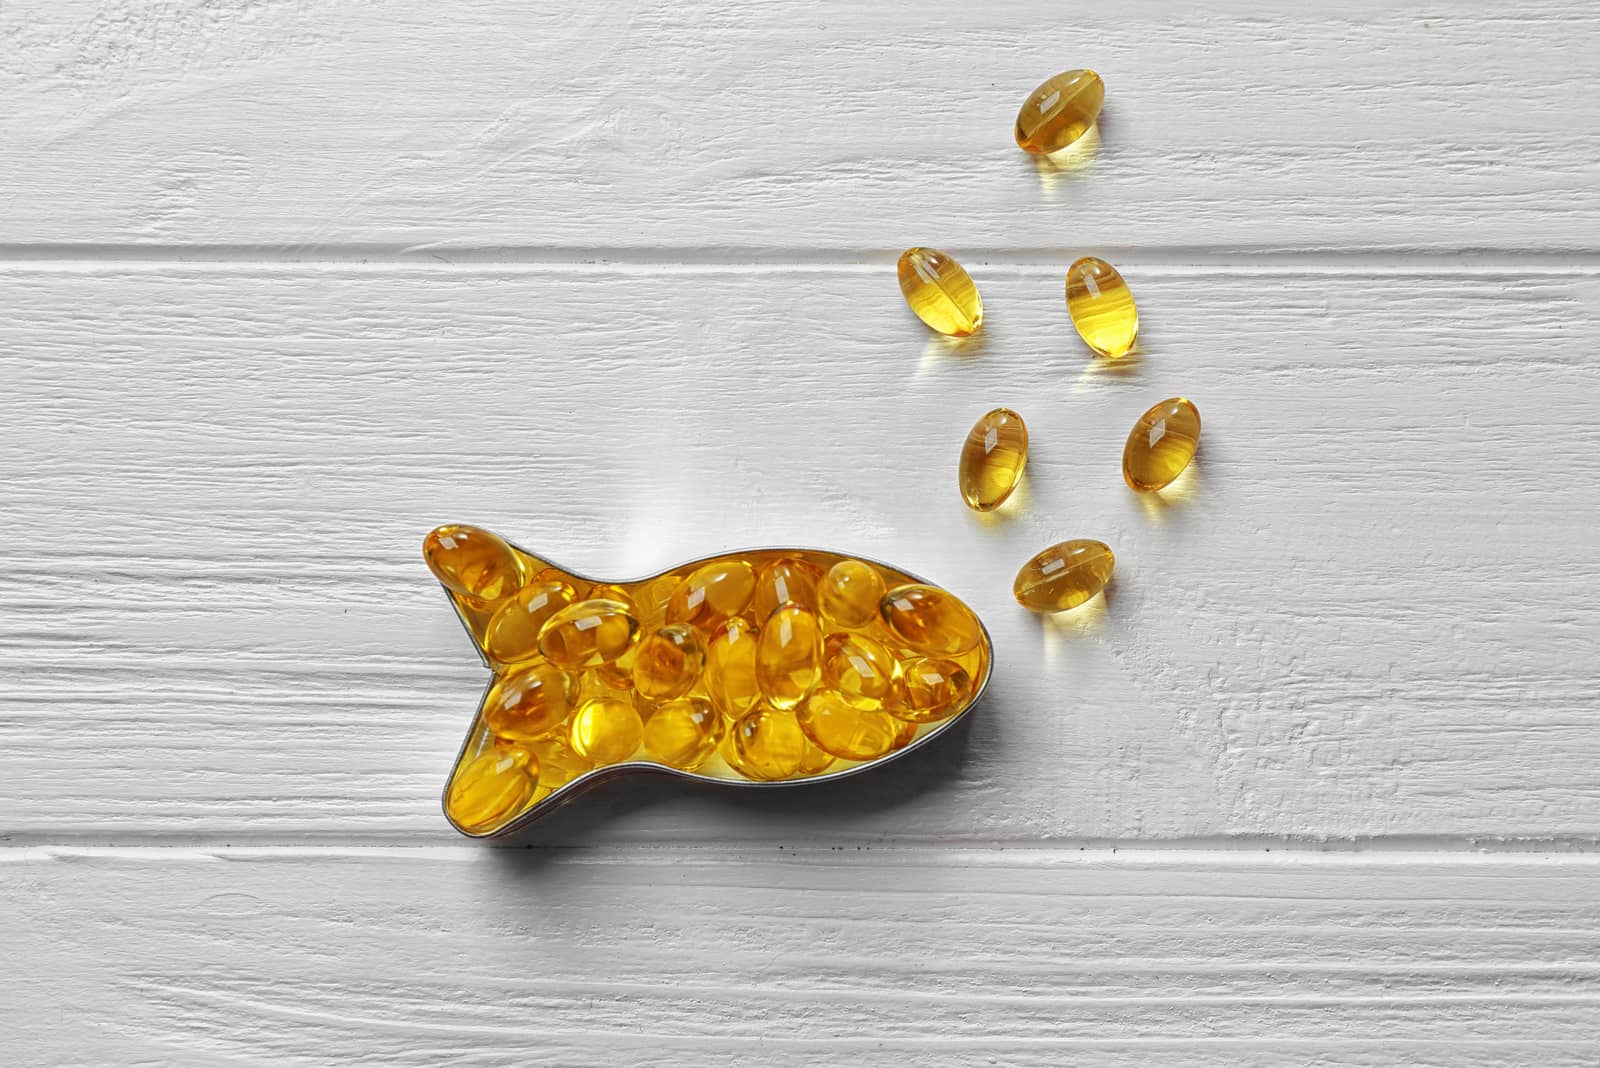 fish oil in capsules on table